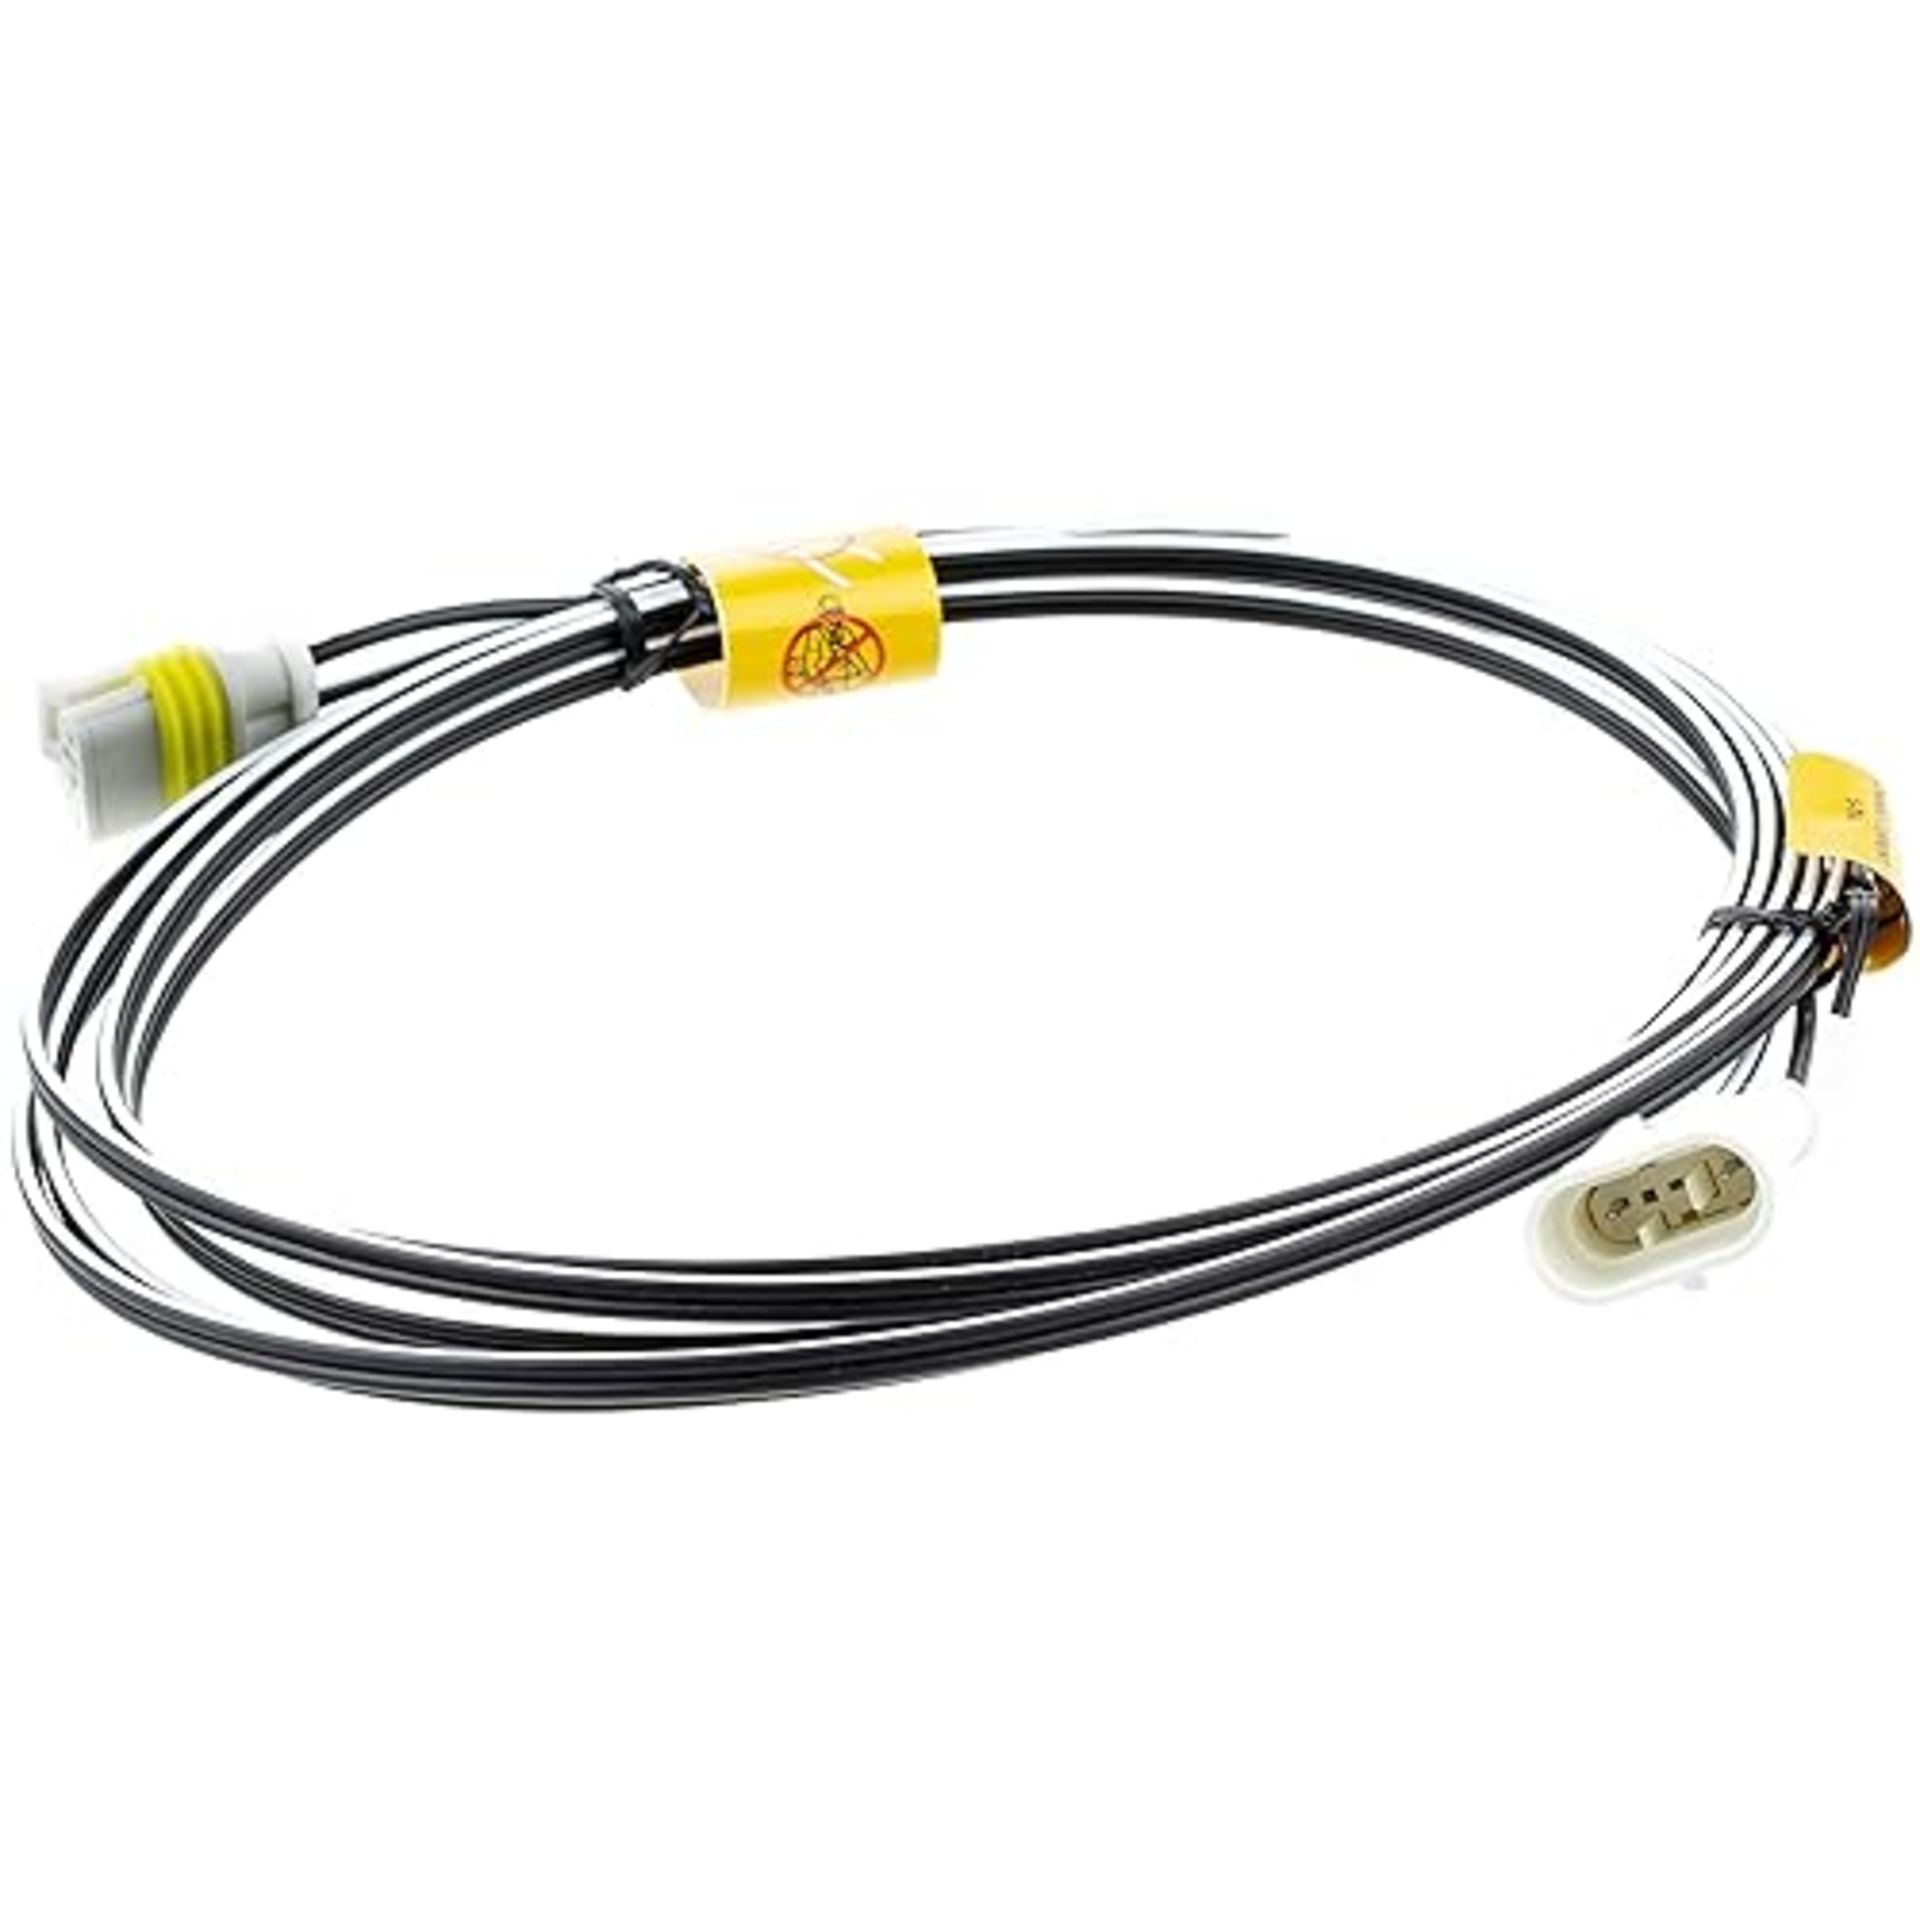 Genuine Flymo Low Voltage Cable for Flymo Robotic Mowers - 5 m - Suitable for EasiLife 200/350/500 